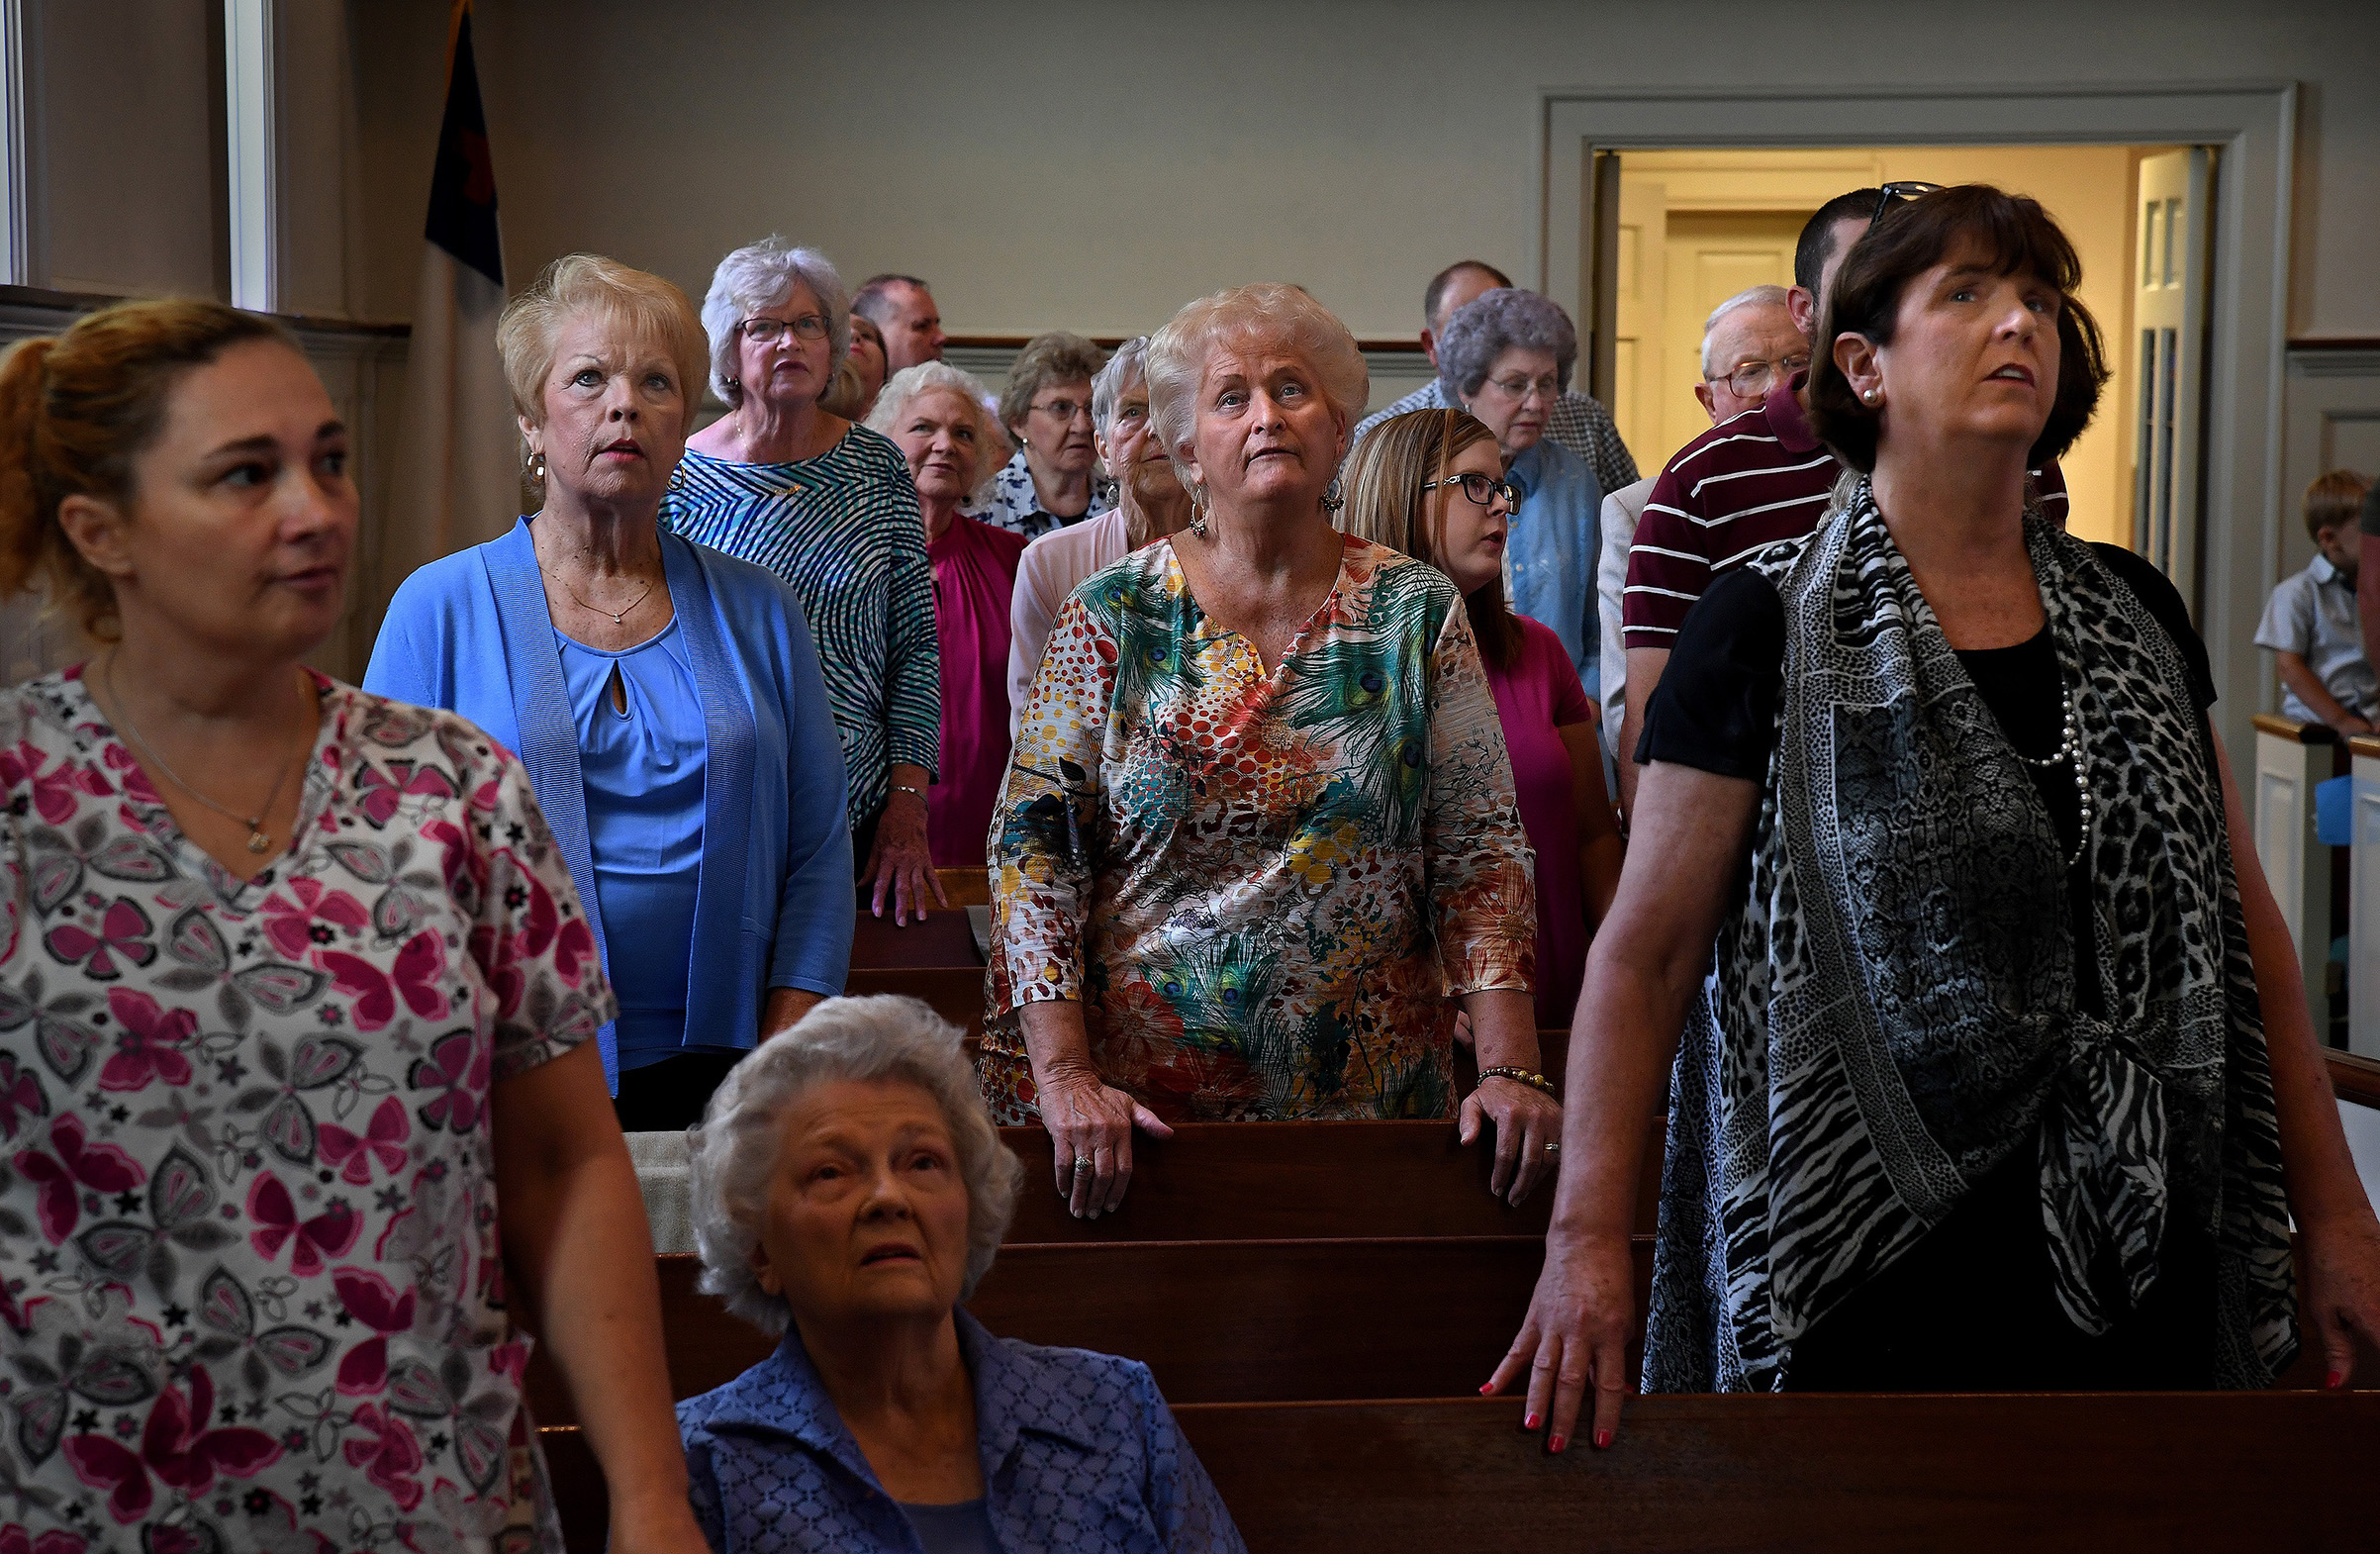 Trump retains strong support among evangelicals, like the congregants of this Baptist church in Luverne, Ala. (Michael S. Williamson—The Washington Post/Getty Images)